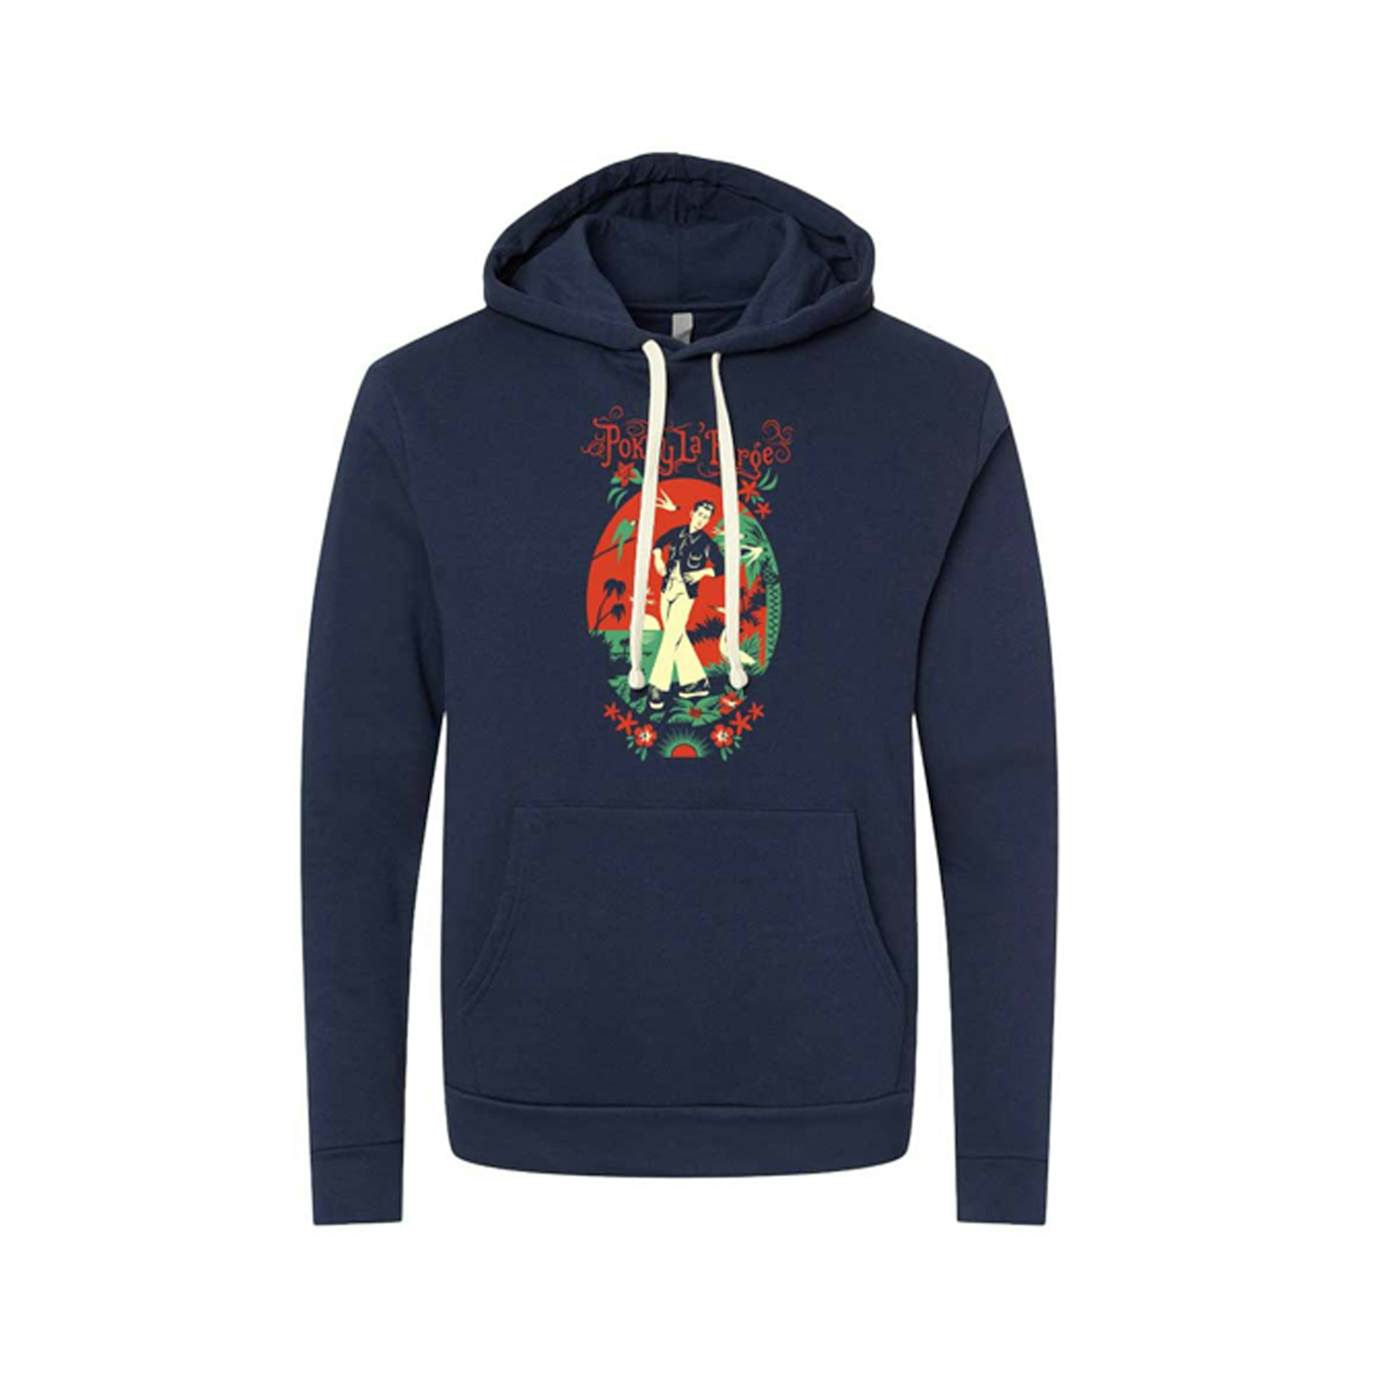 Pokey LaFarge UNISEX "IN THE BLOSSOM OF THEIR SHADE" HOODIE